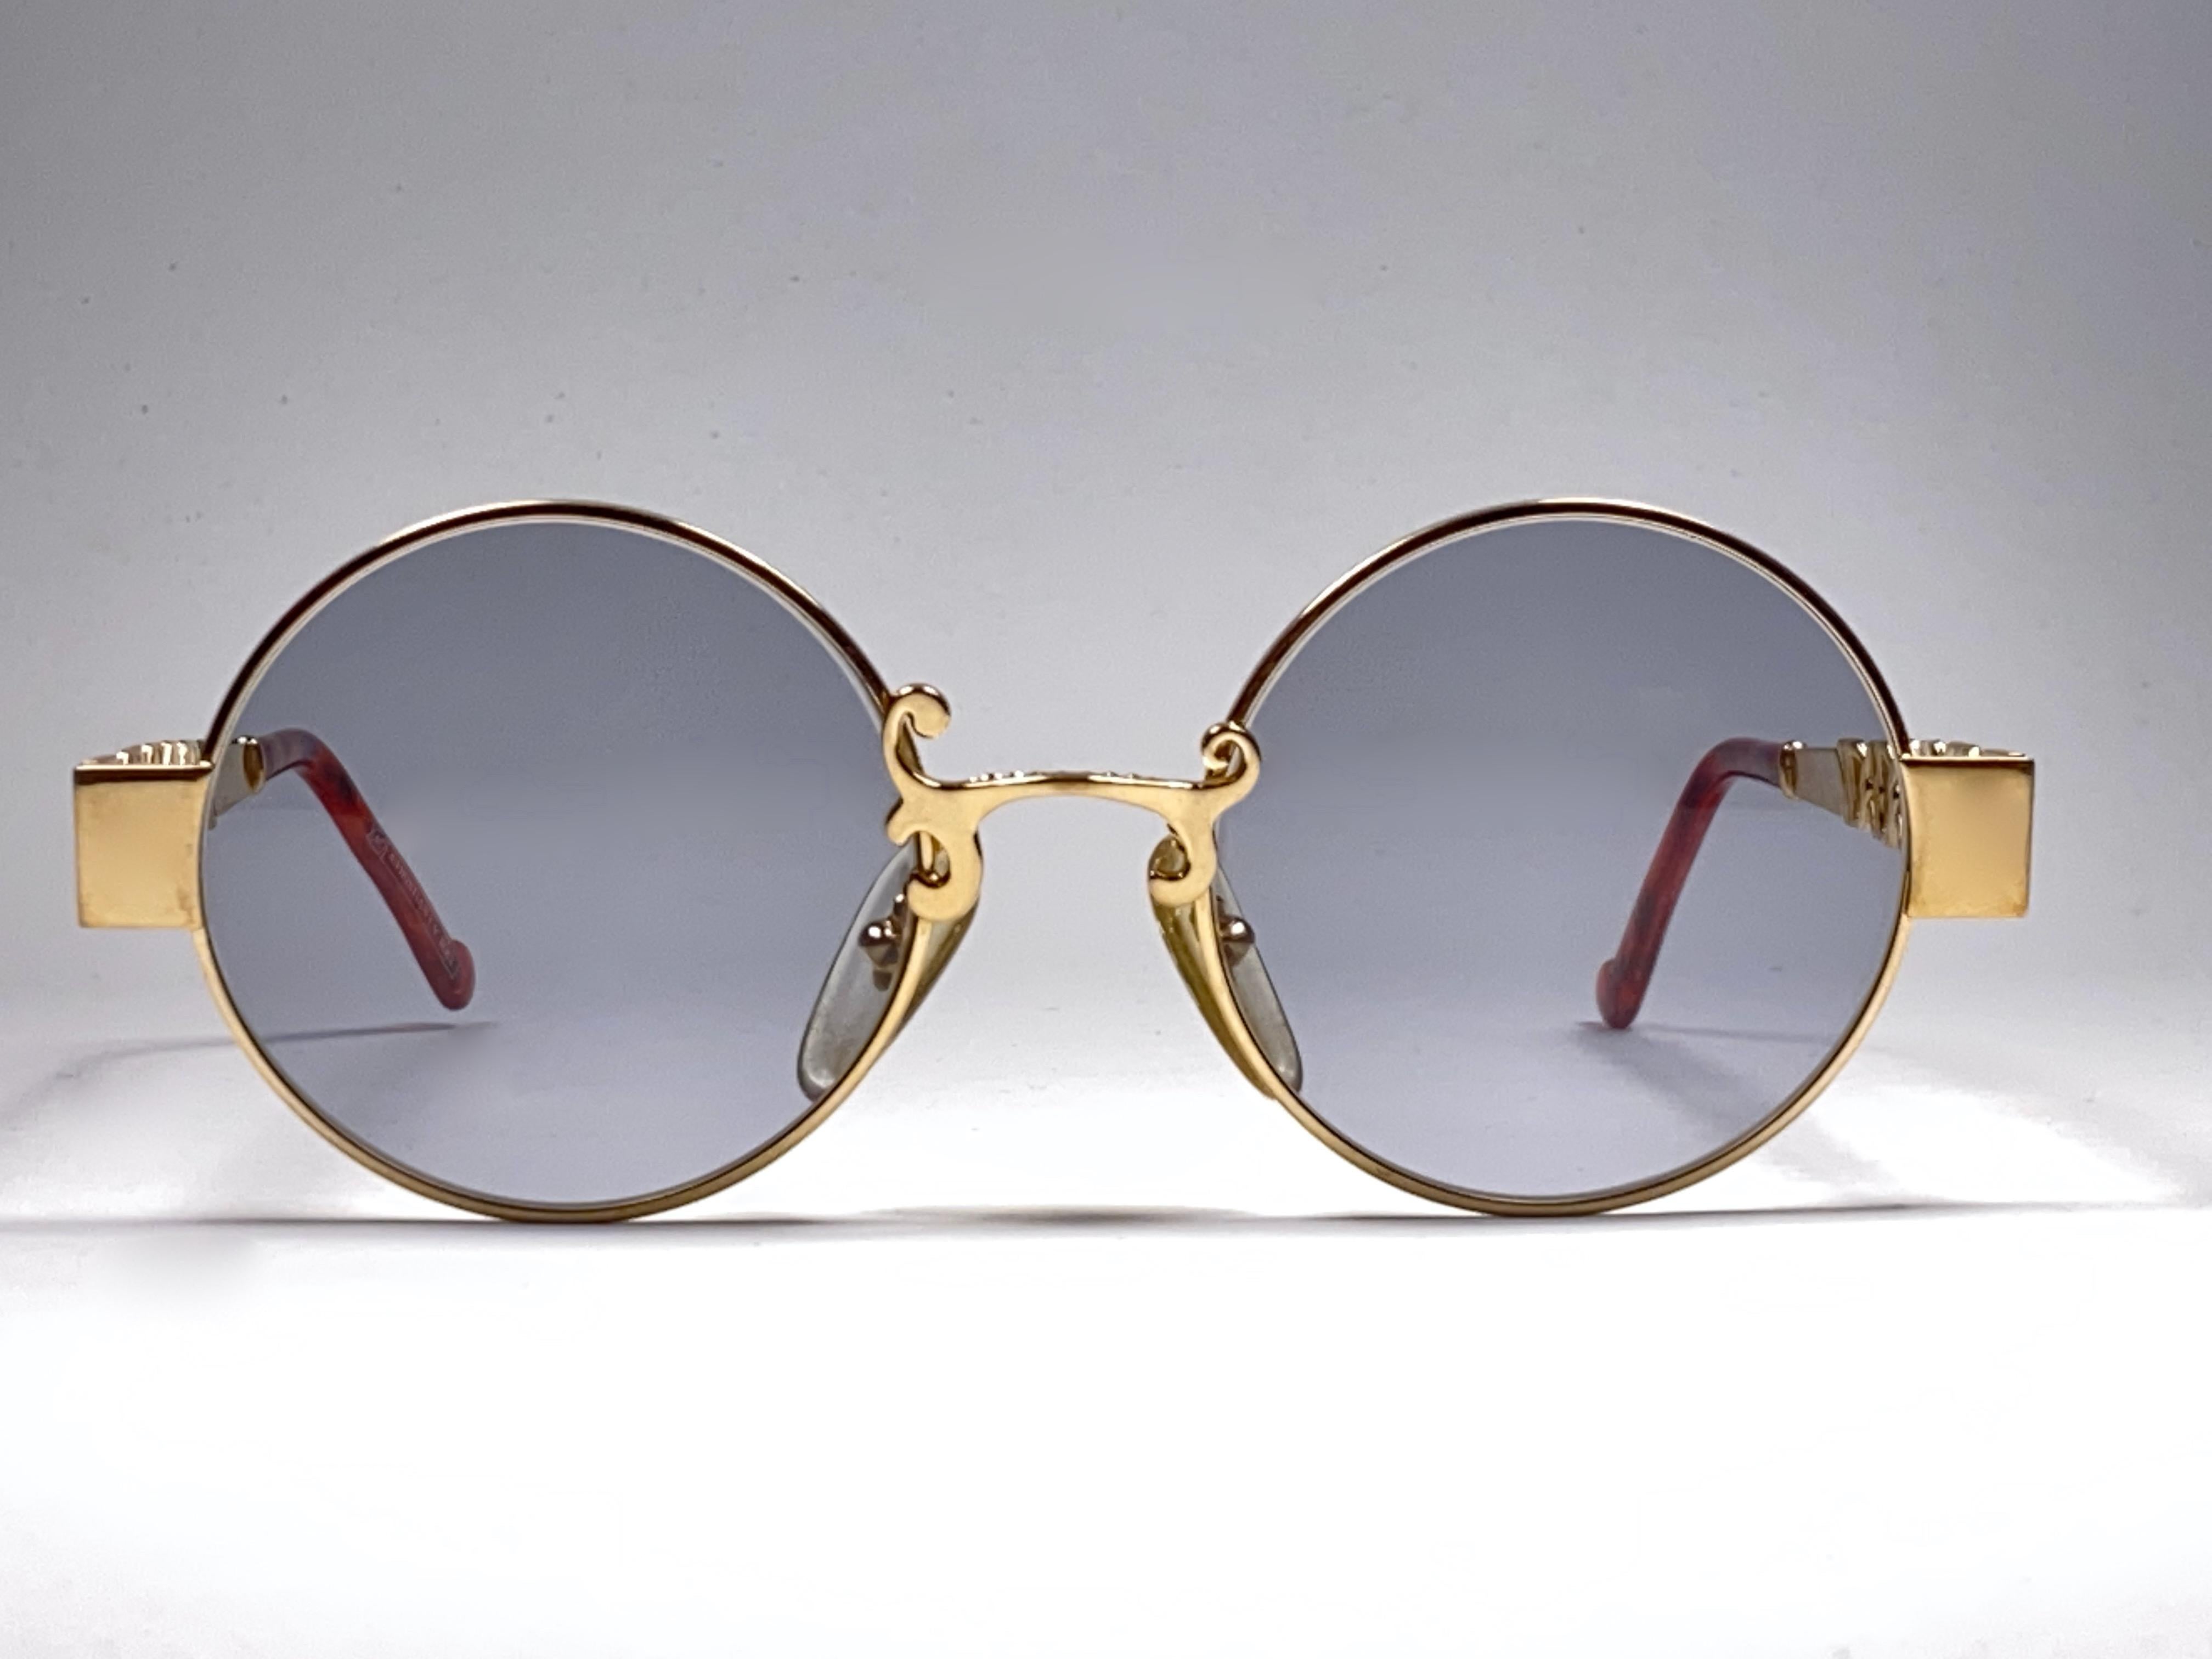 Superb & rare pair of vintage Christian Lacroix sunglasses.    

Spotless Light Lenses.

New, never worn or displayed. Please notice this item its nearly 40 years old and may show minor sign of wear due to storage.

 Made in France.

Front : 13.5